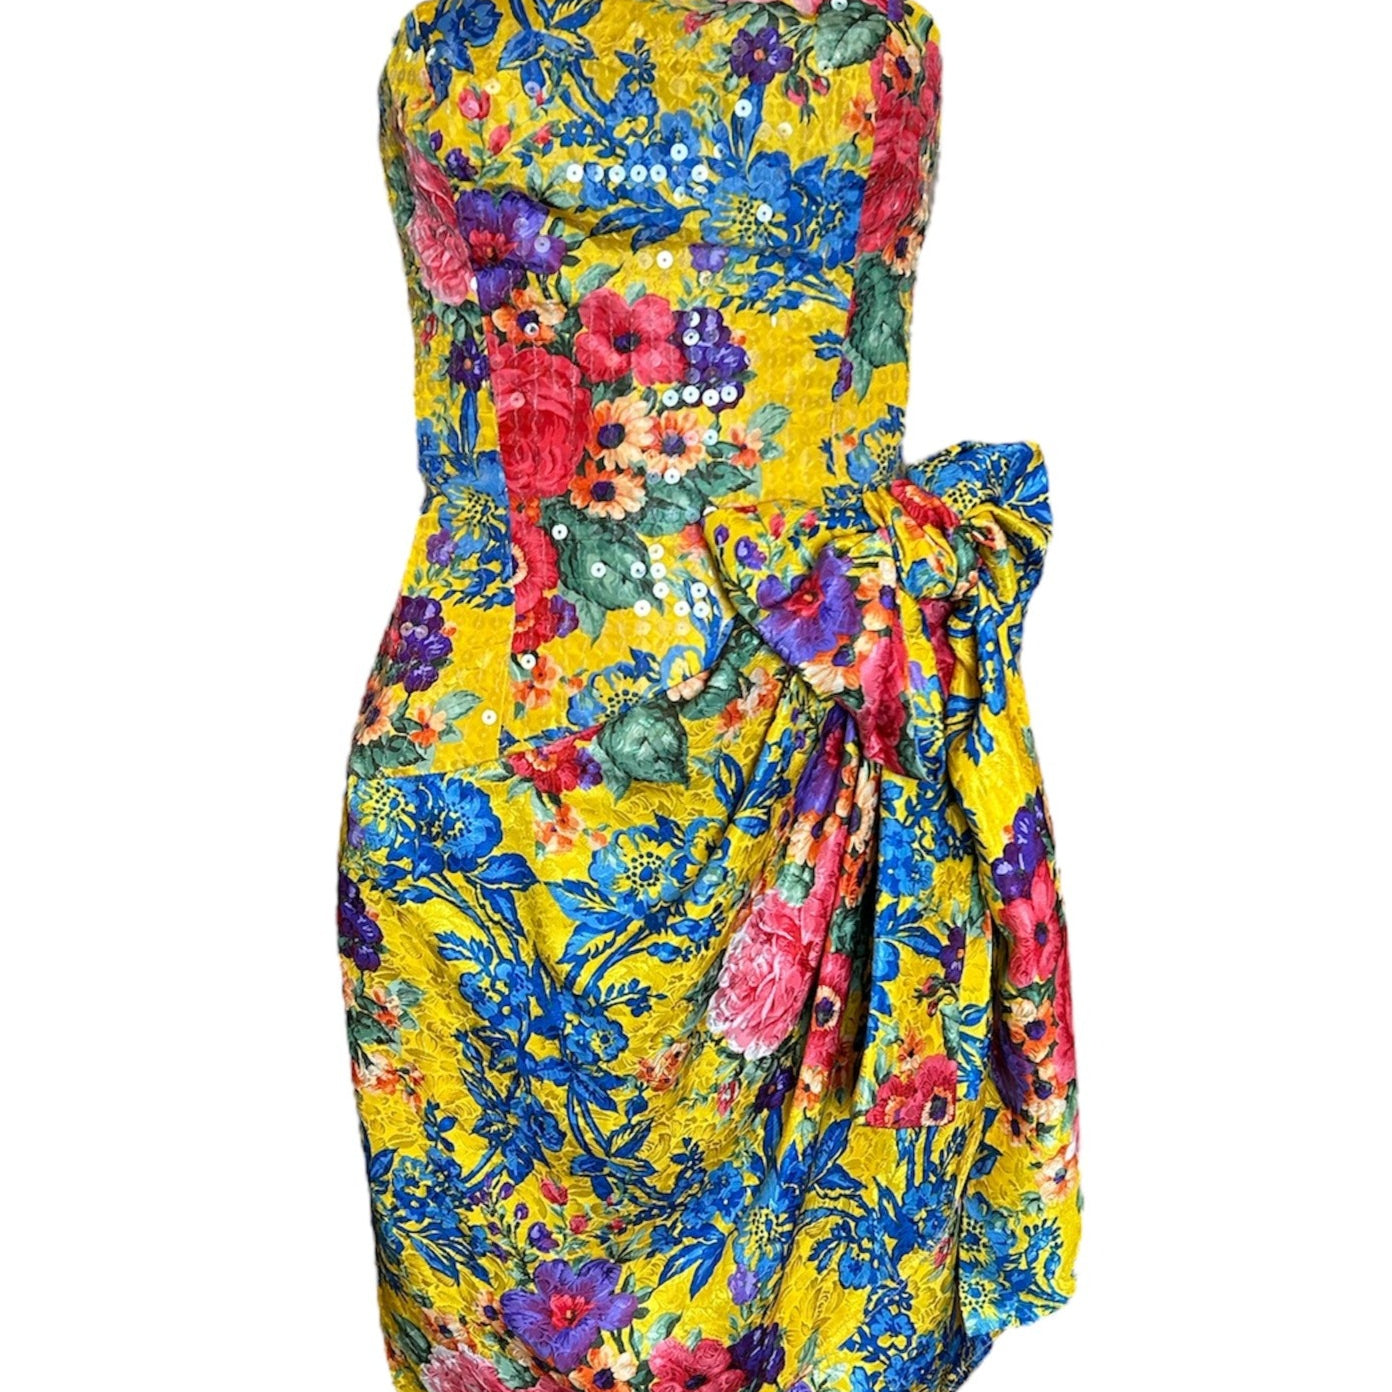  Bellville Sassoon Yellow Floral Silk & Sequined Cocktail Dress FRONT PHOTO 1 OF 6